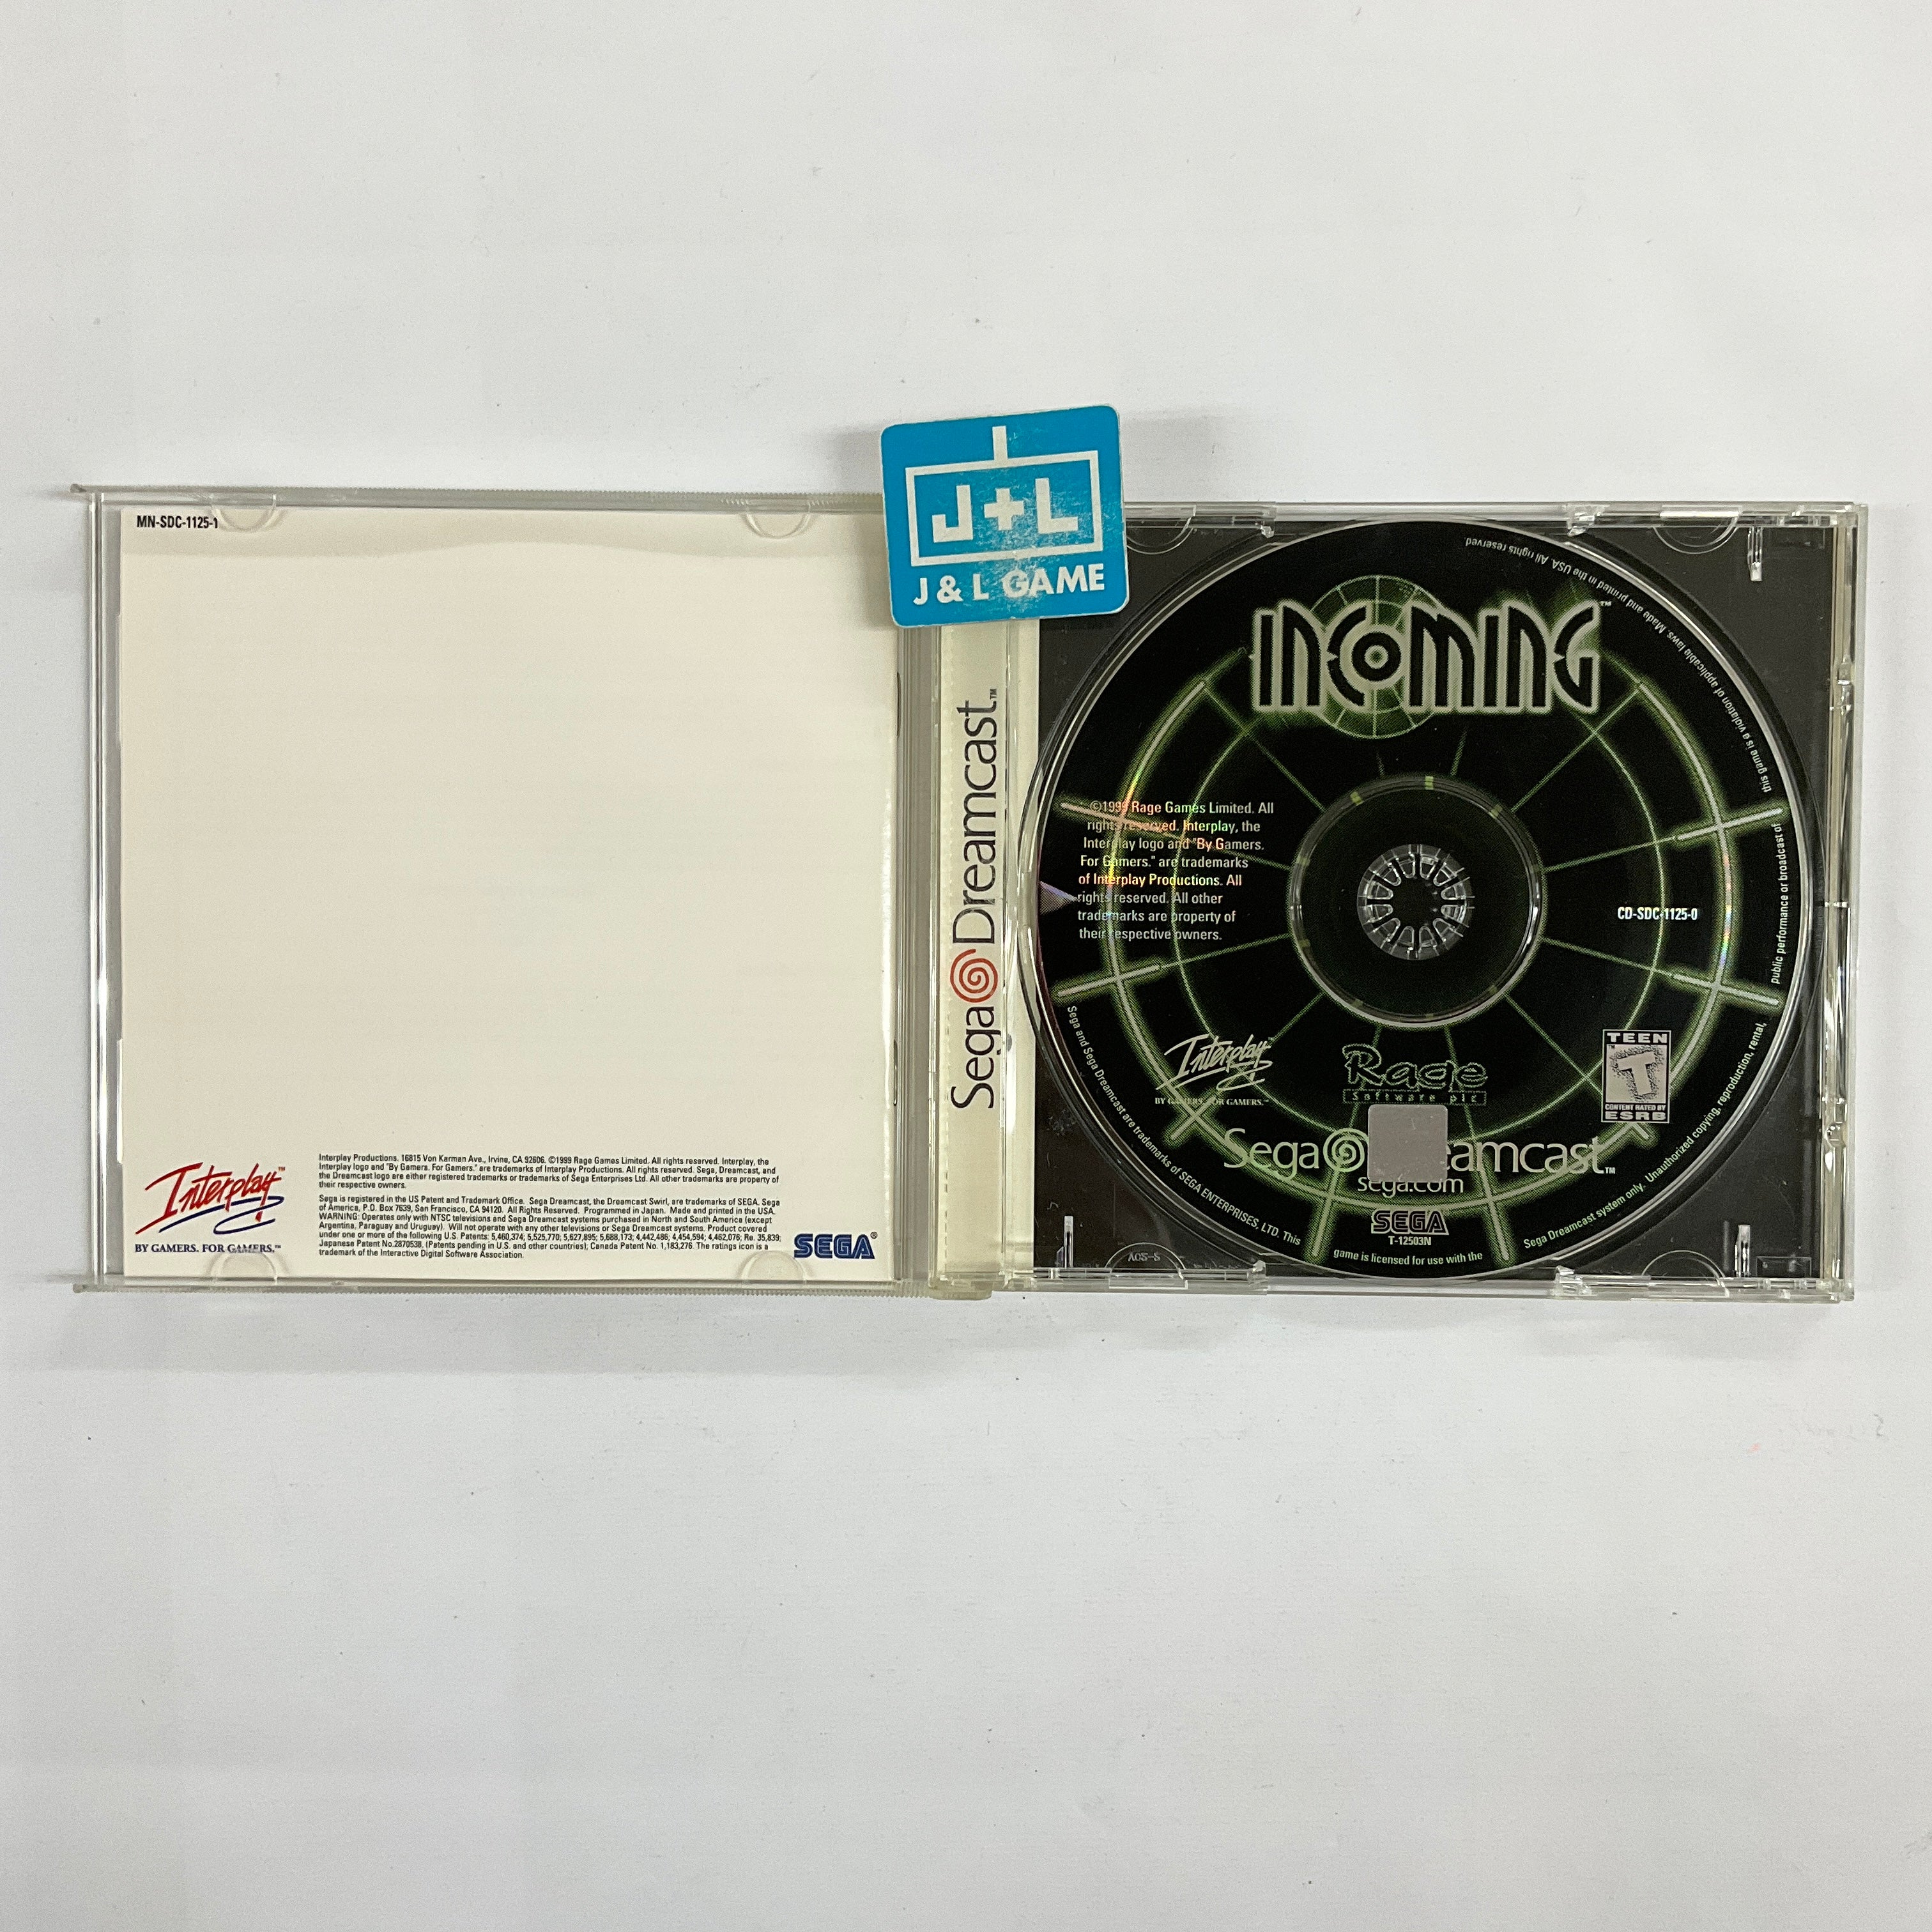 Incoming - (DC) SEGA Dreamcast [Pre-Owned] Video Games Interplay   